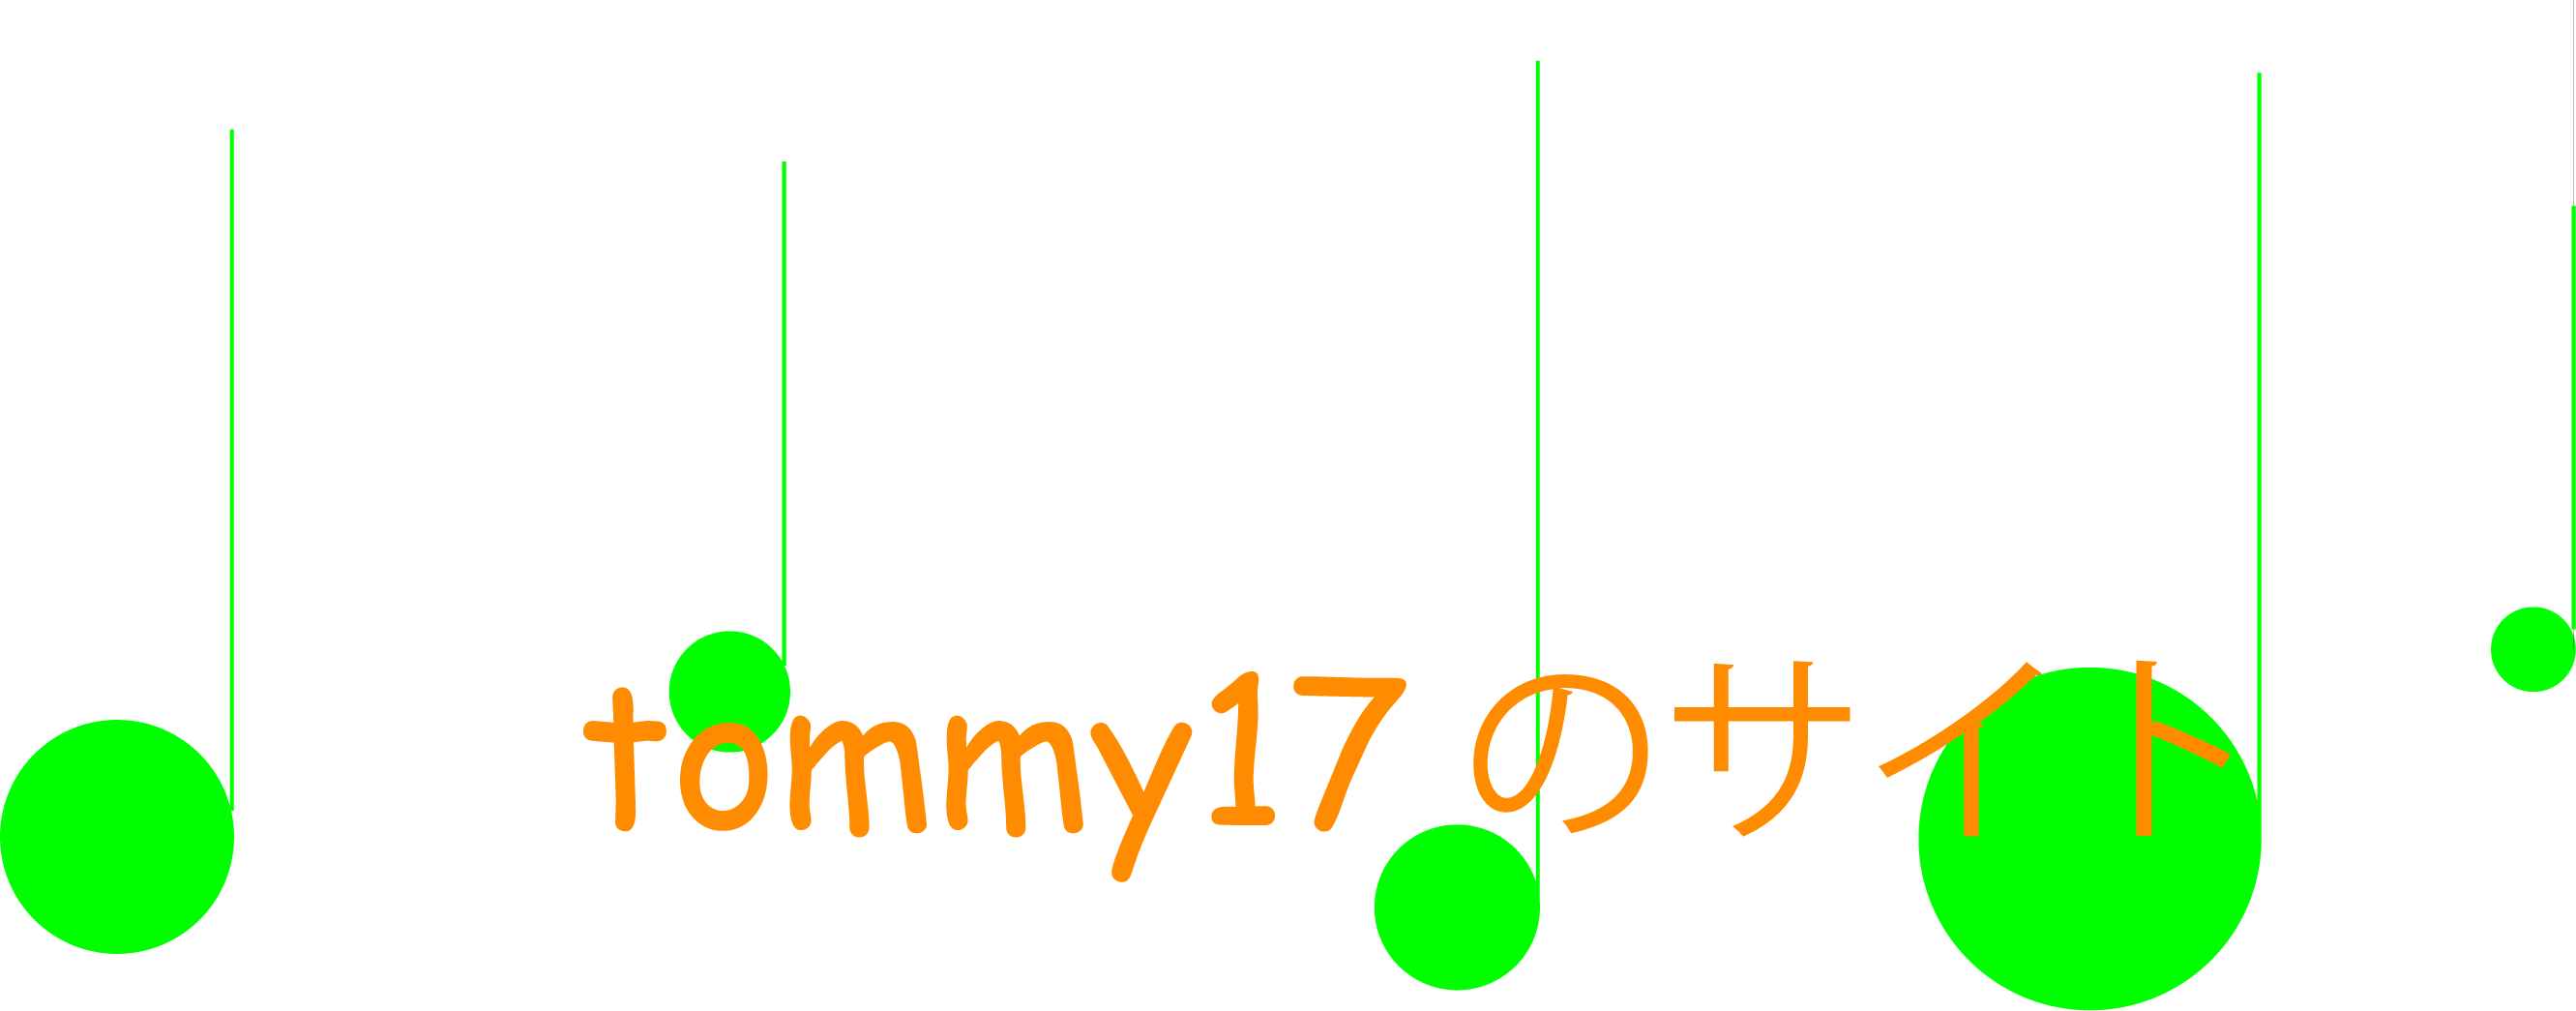 tommy17のサイト